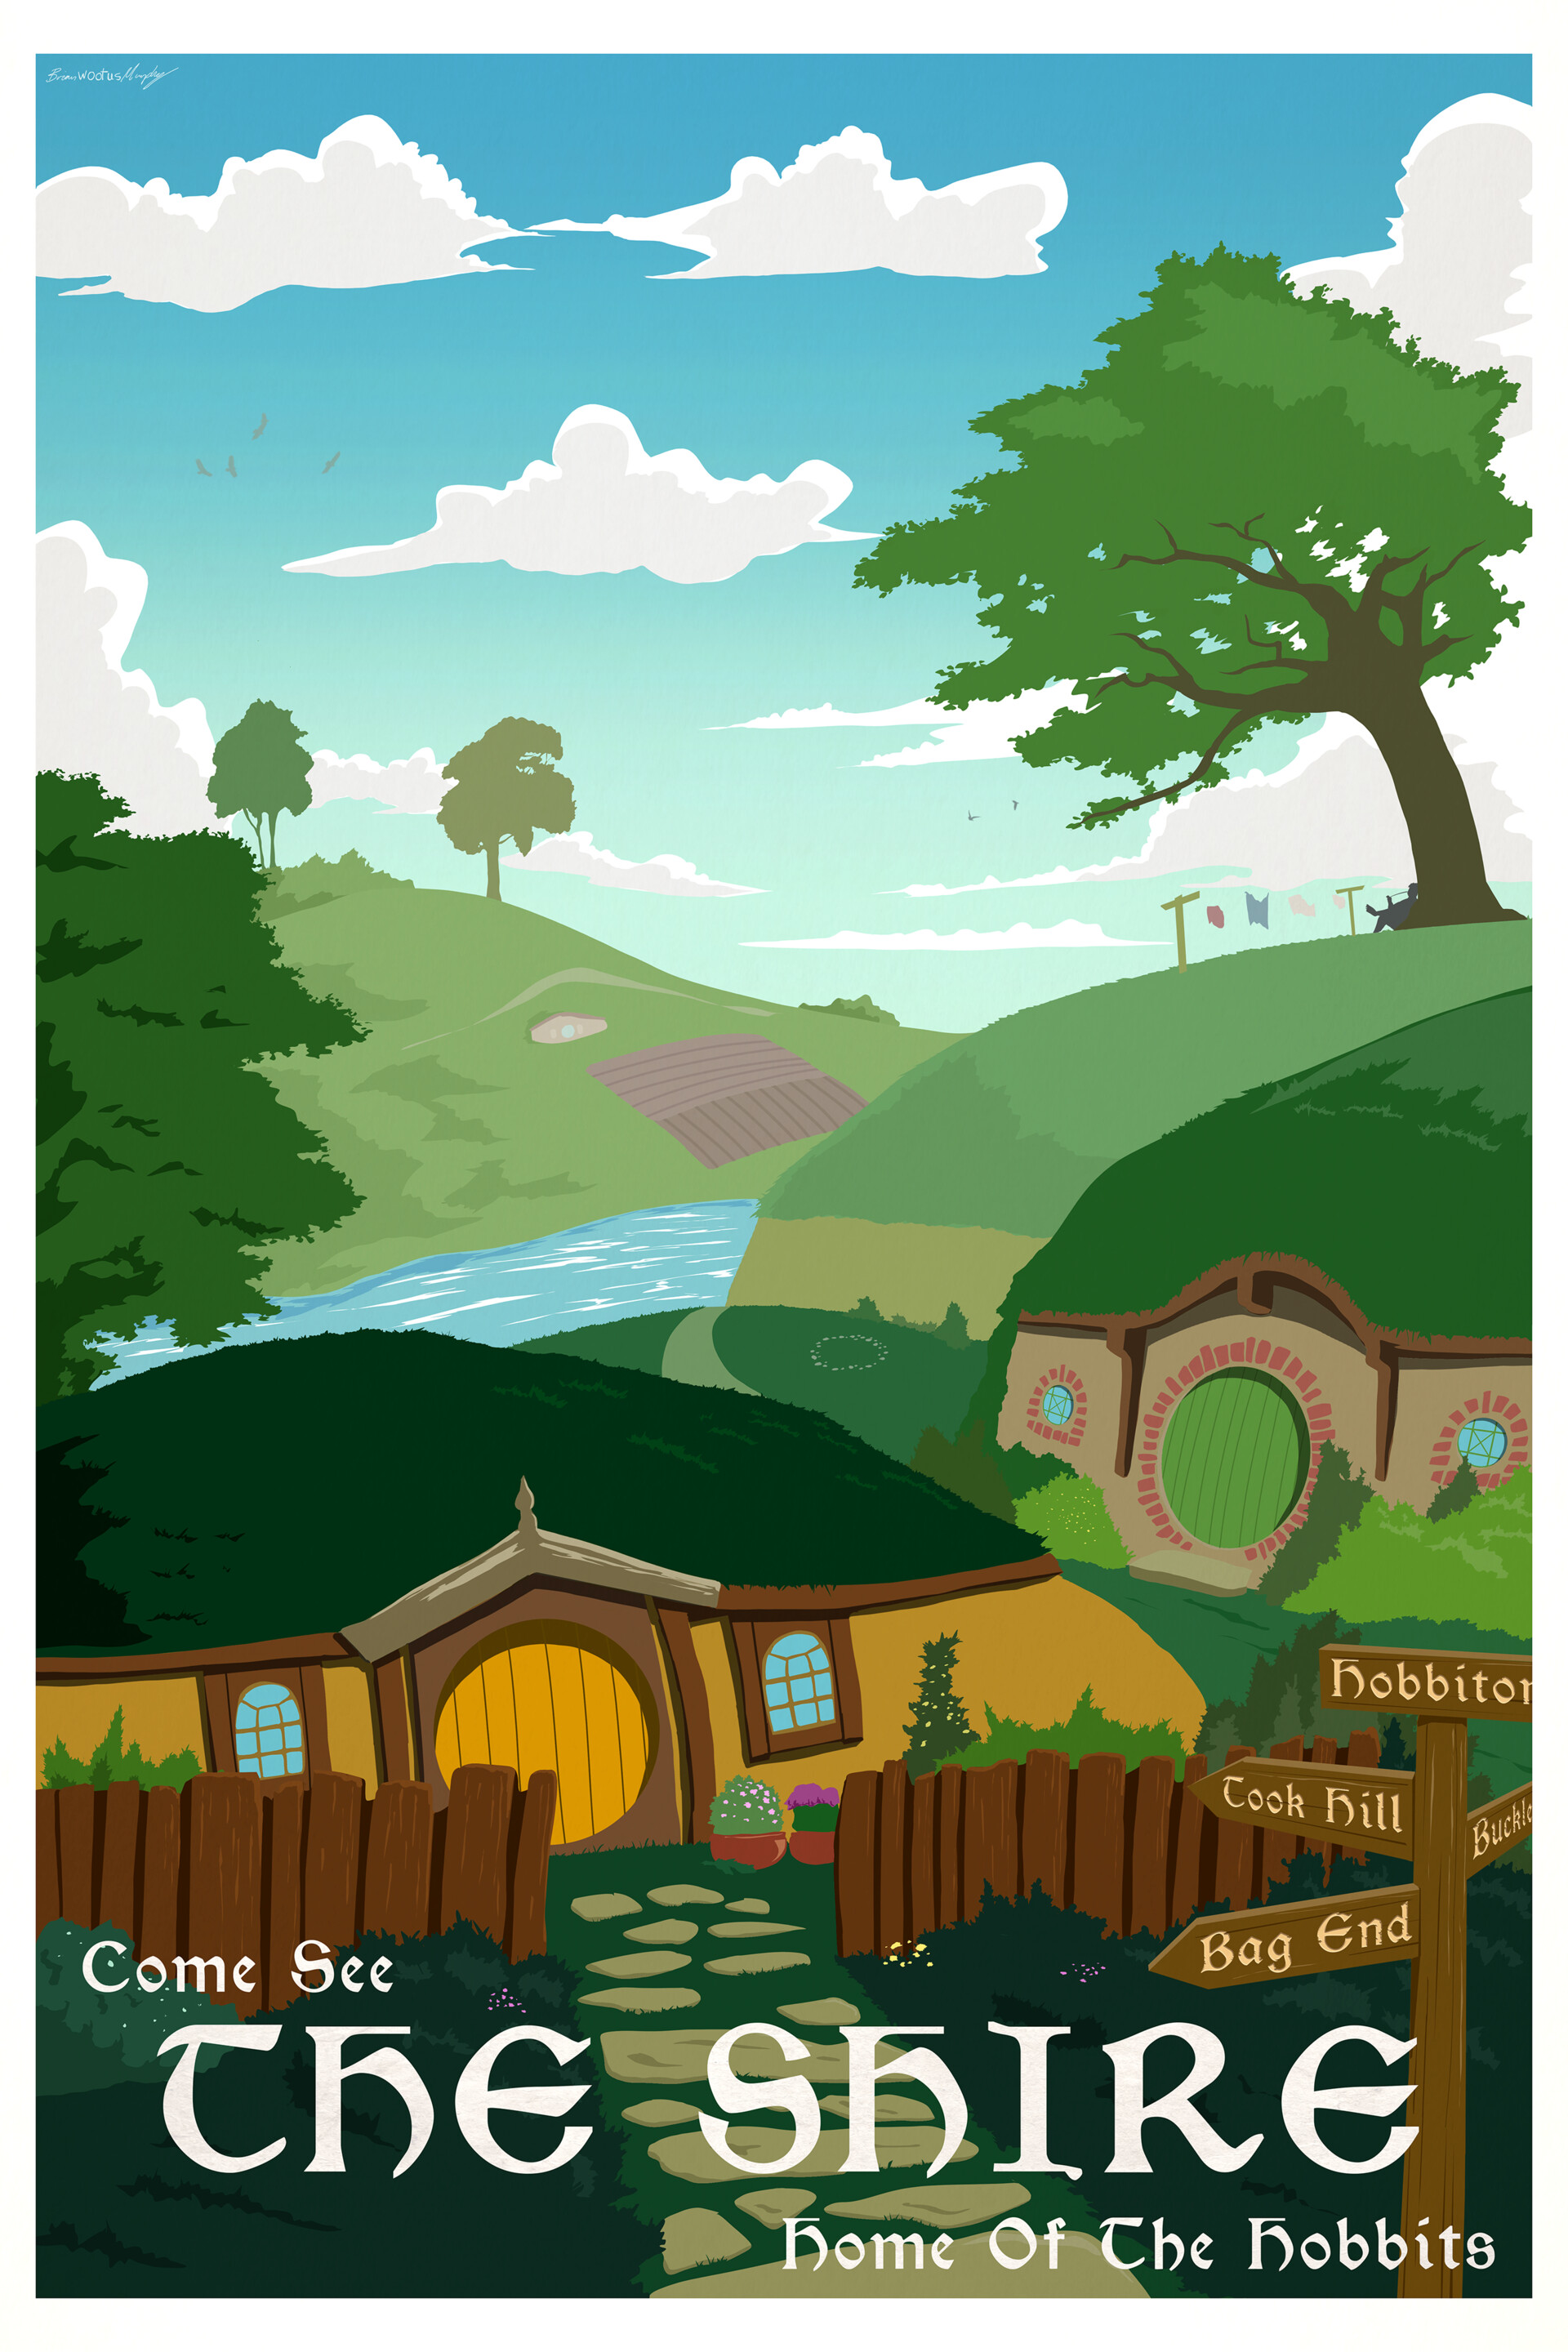 shire travel poster